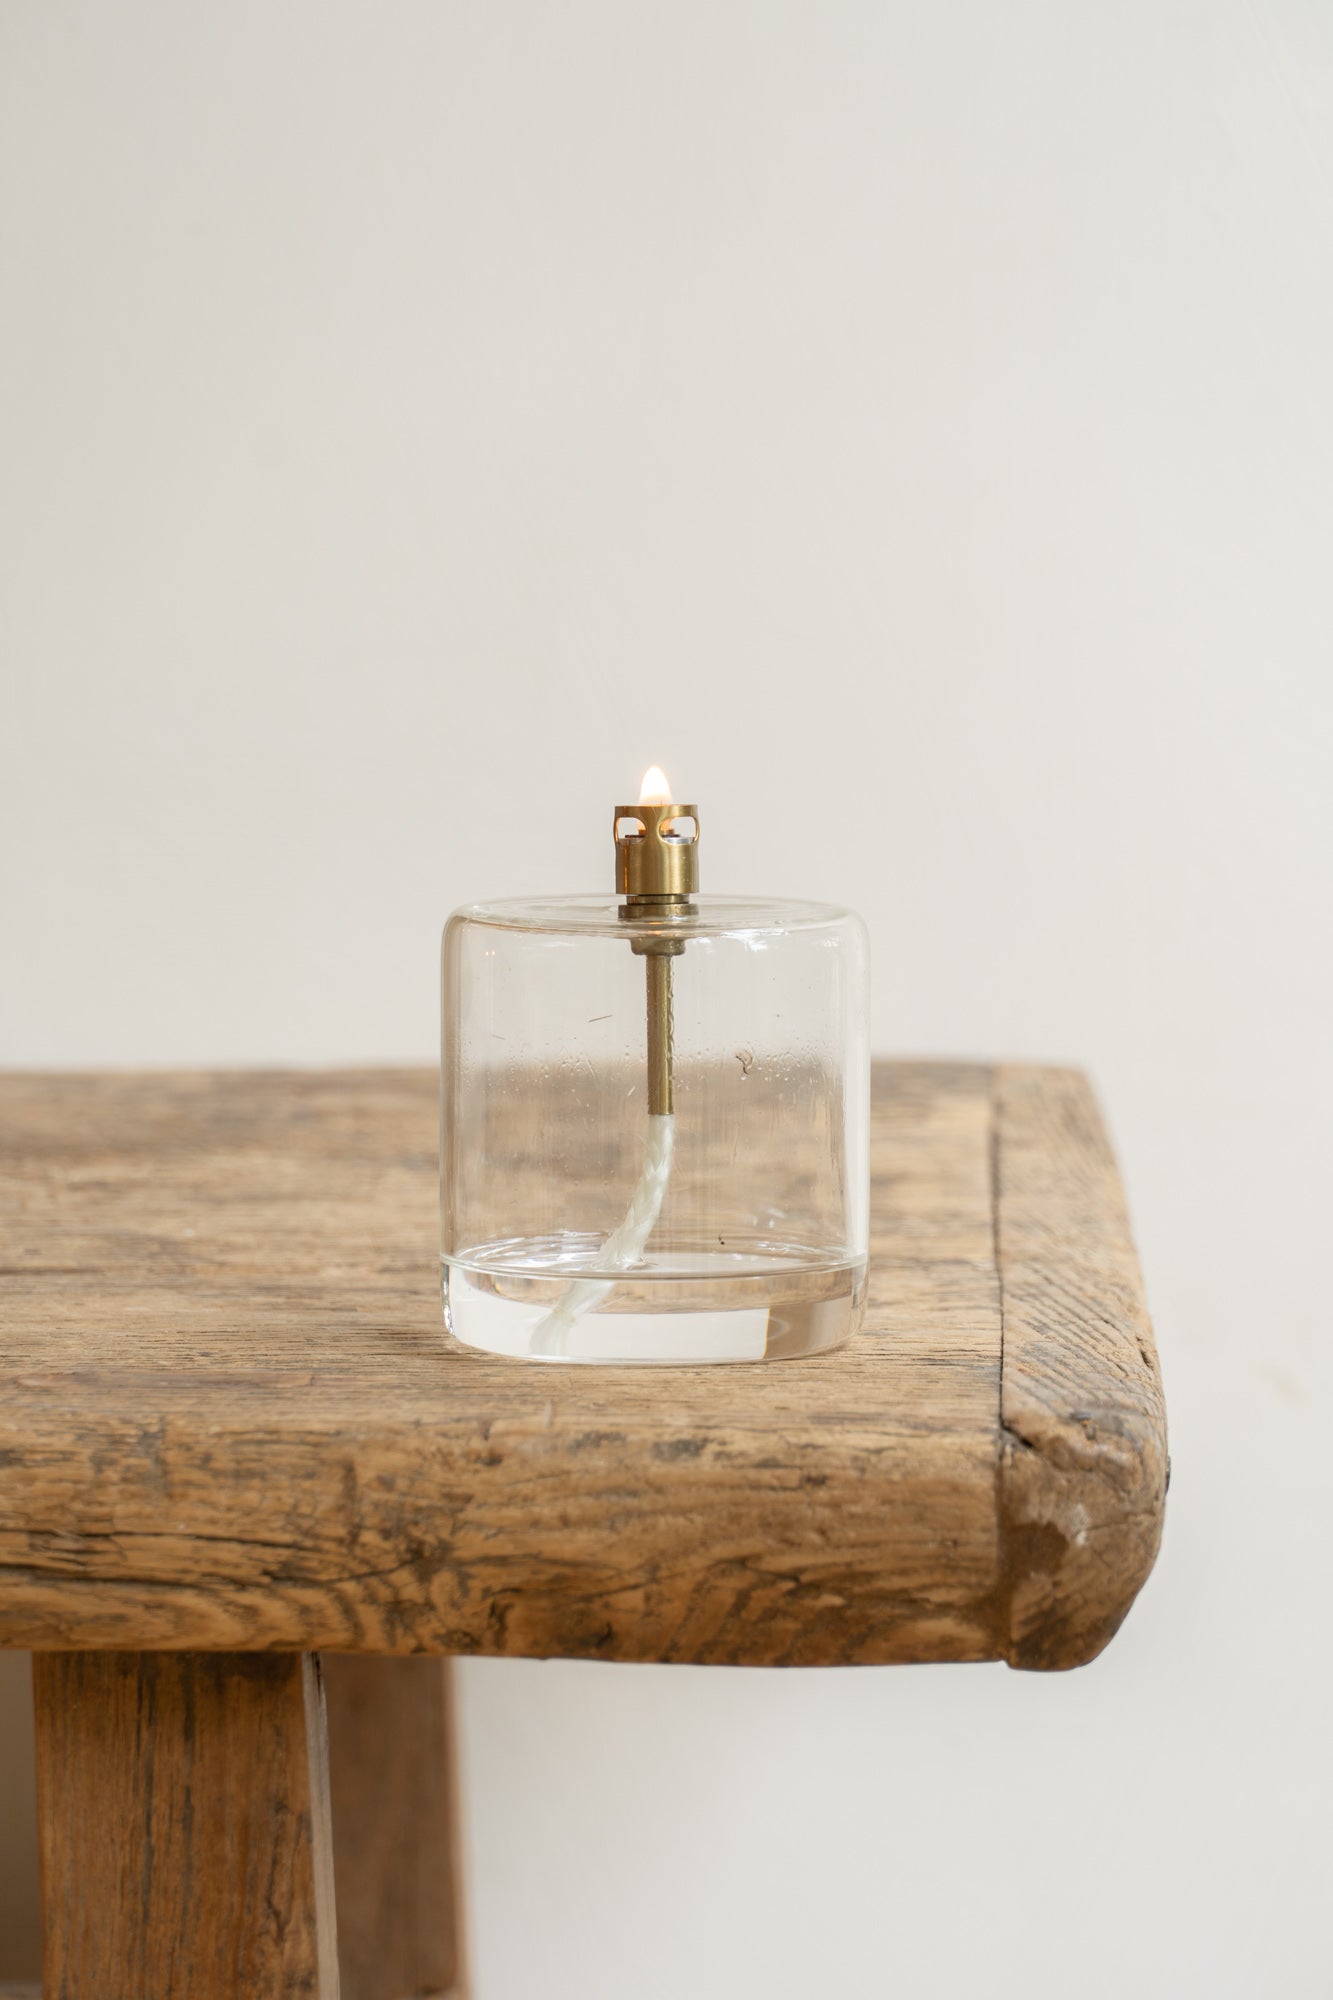 Cyl Oil Lamp - Medium by The Loft Selects.